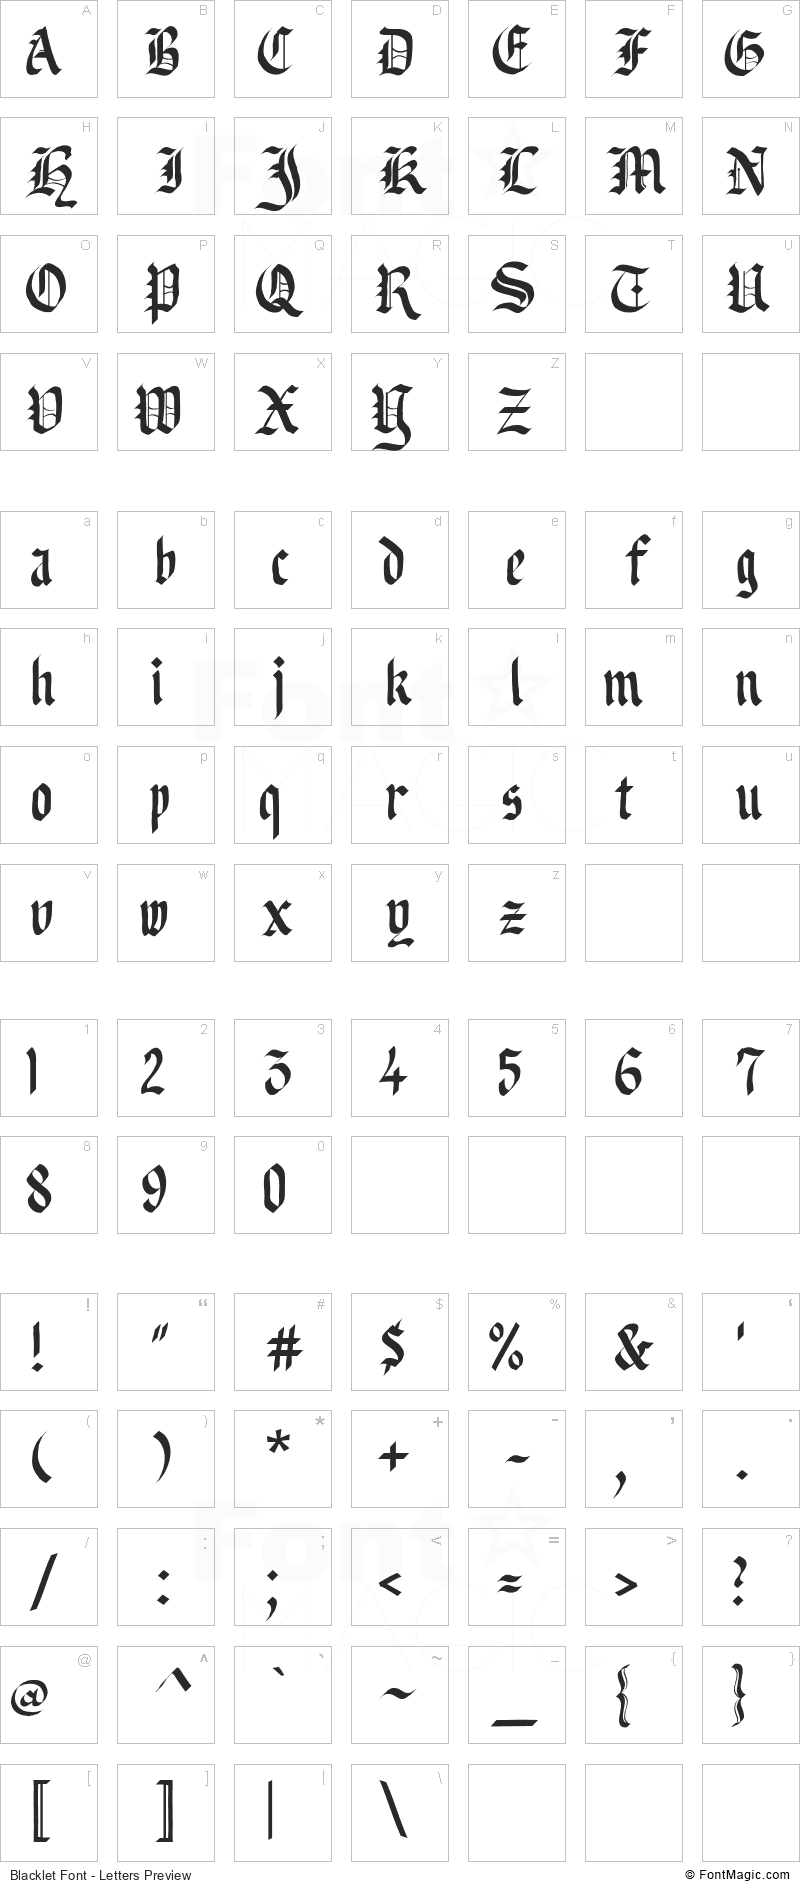 Blacklet Font - All Latters Preview Chart